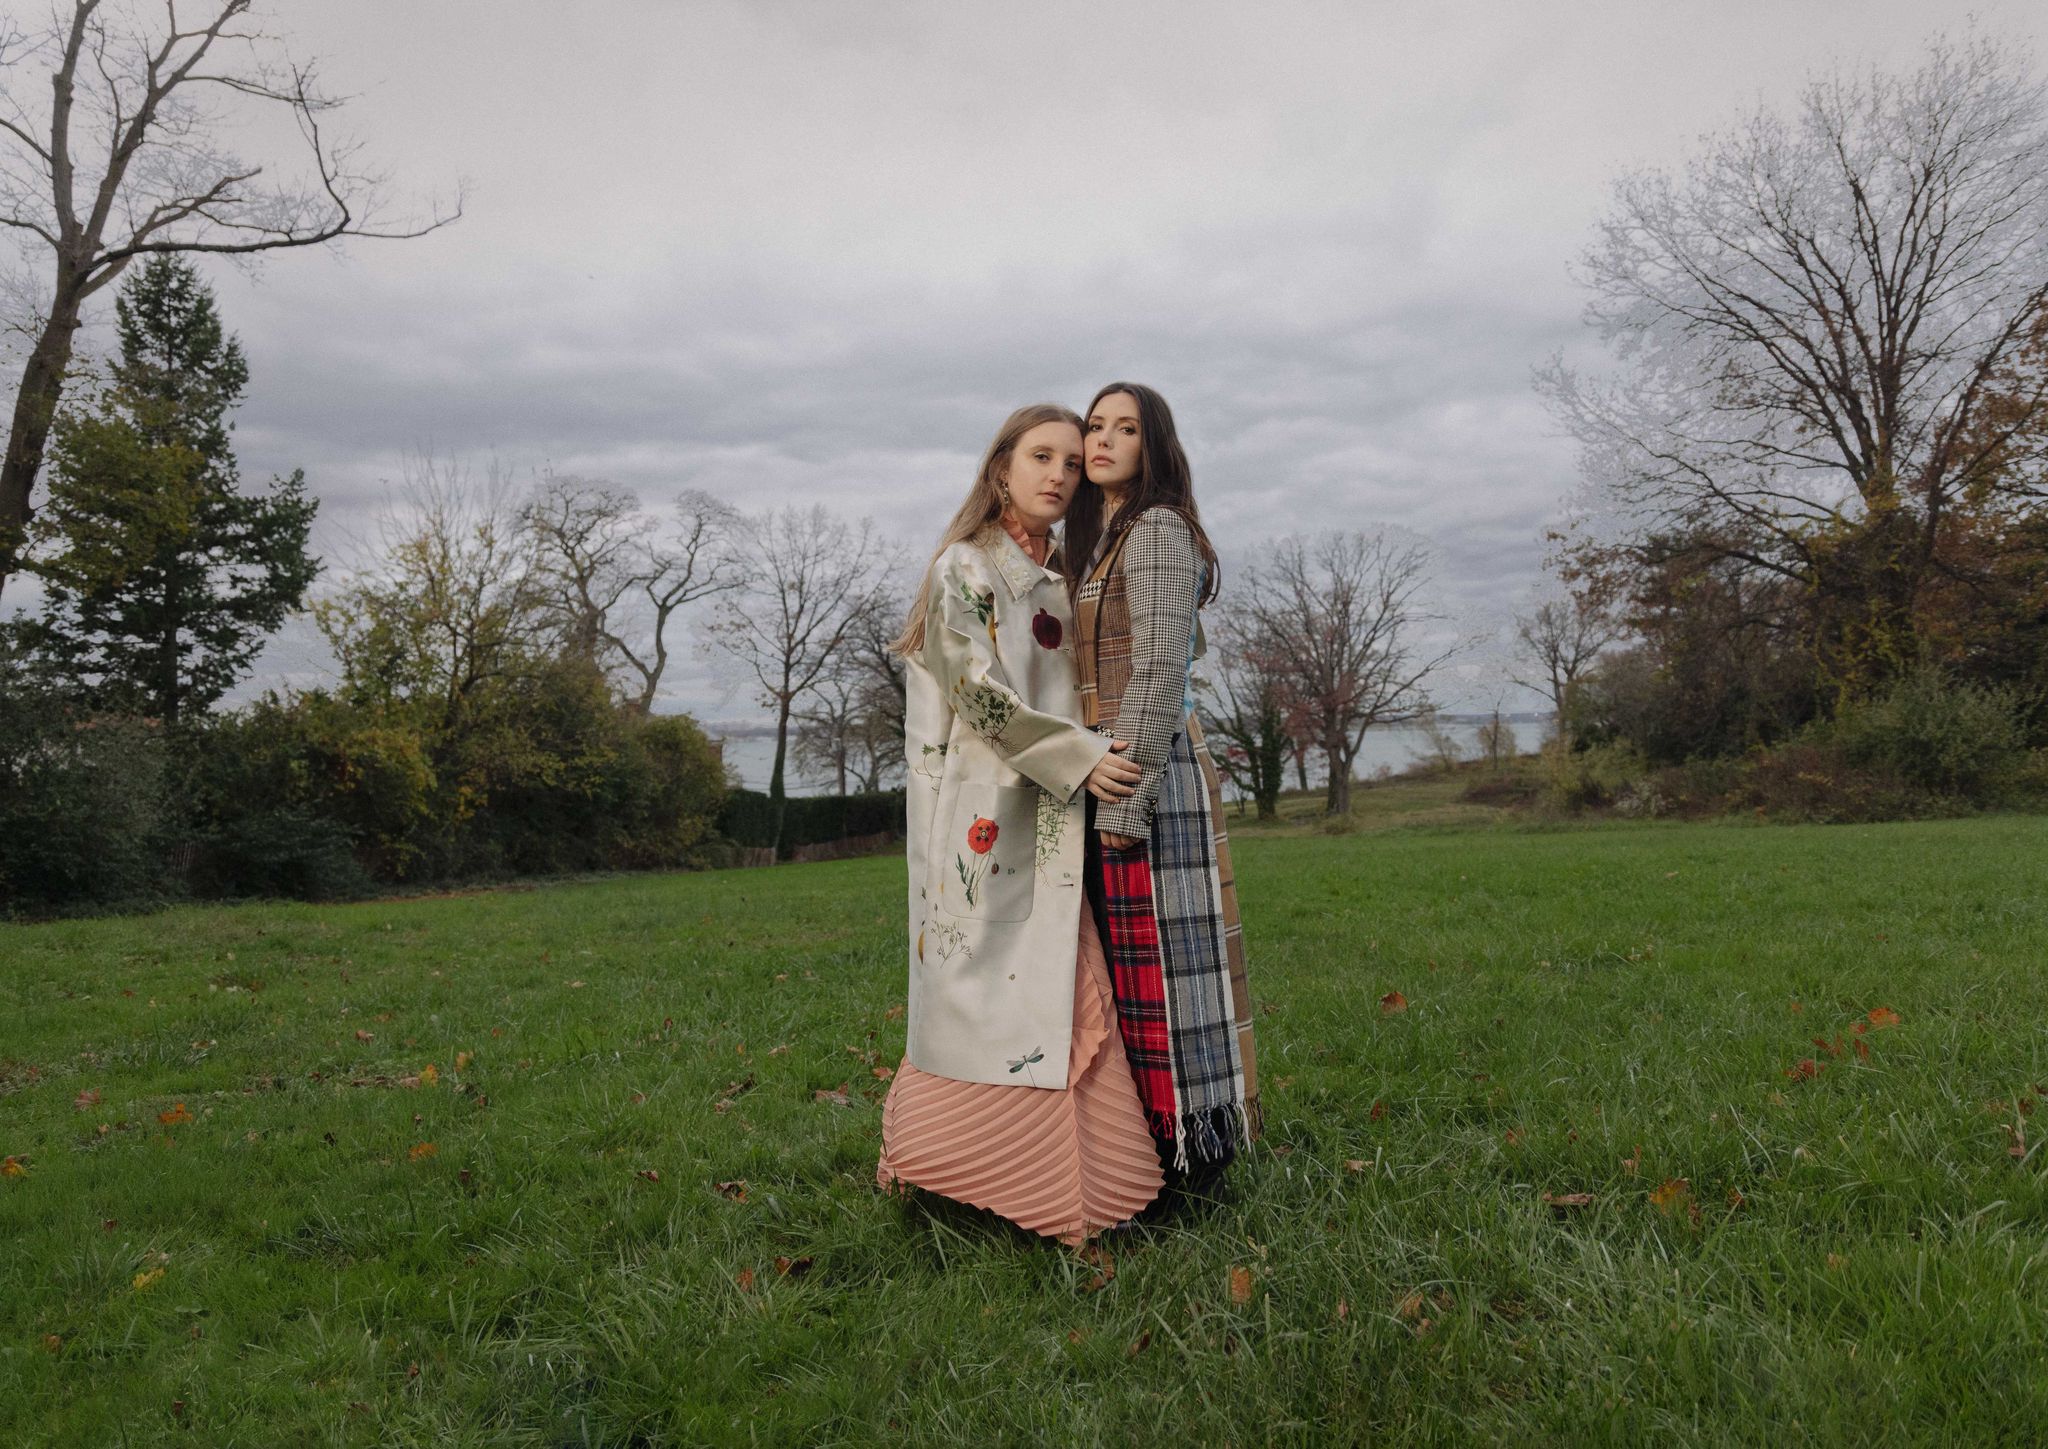 olivia and emma handler stand in a grassy field